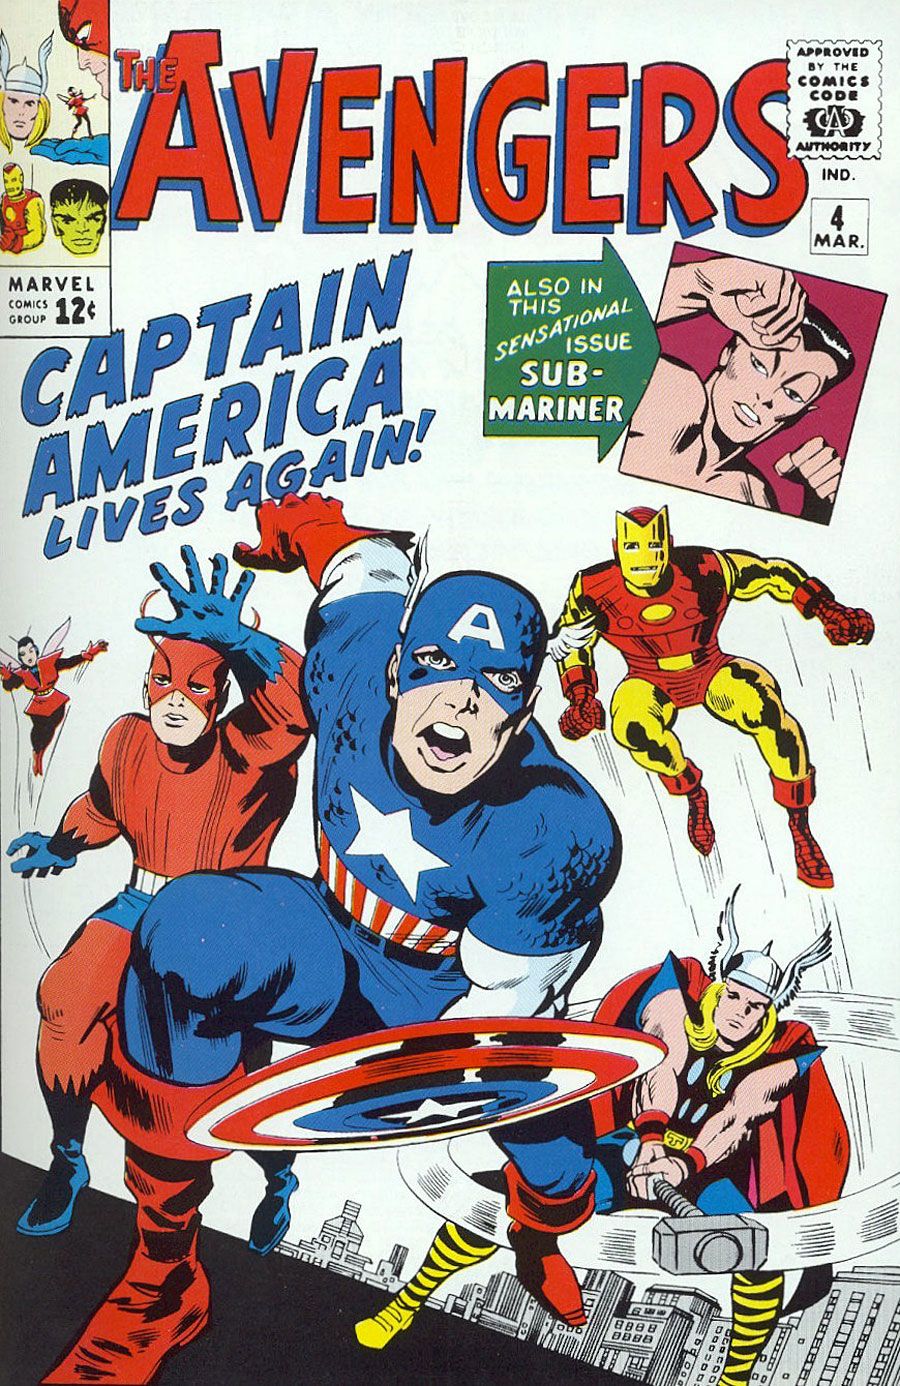 Jack Kirby&#039;s cover for the original Avengers #4